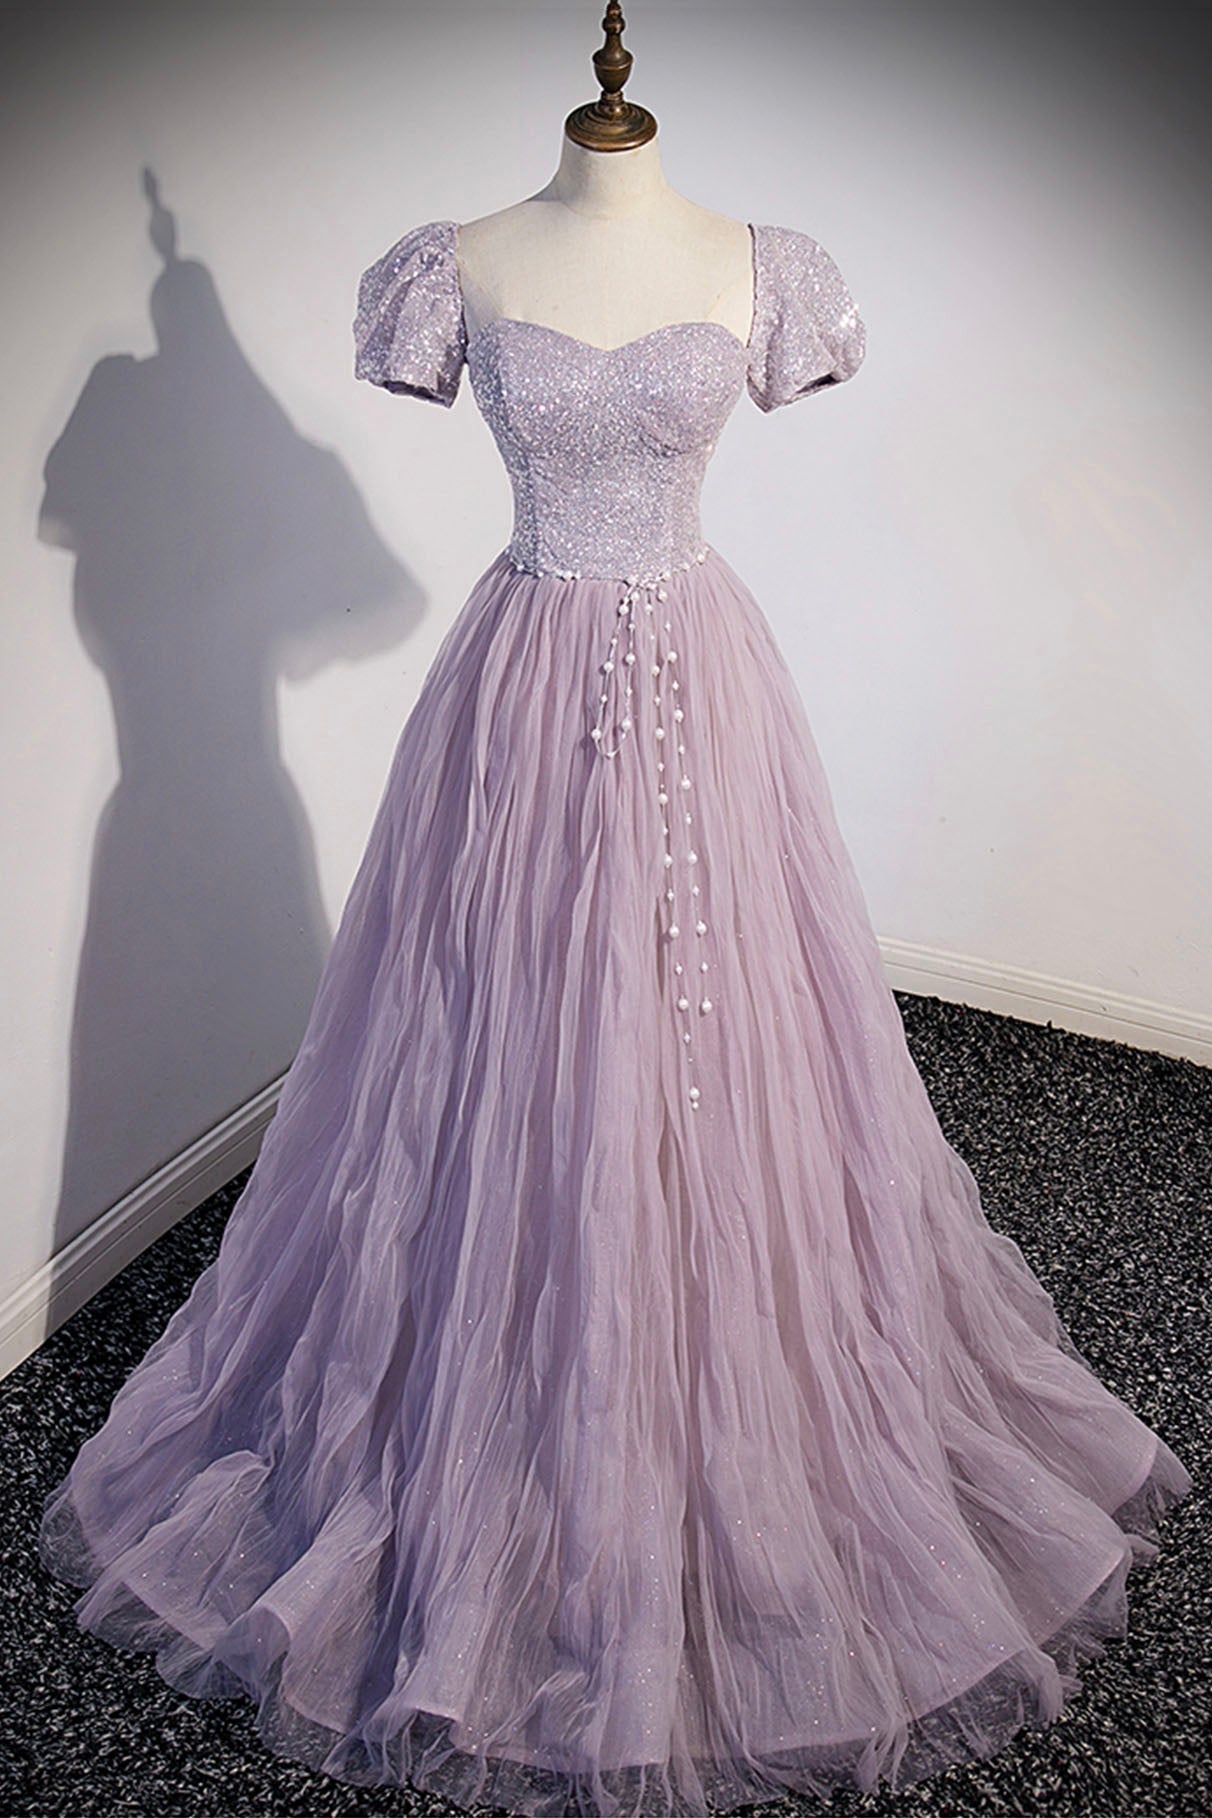 Purple Tulle Long A-Line Prom Dress Outfits For Girls, Purple Short Sleeve Evening Party Dress